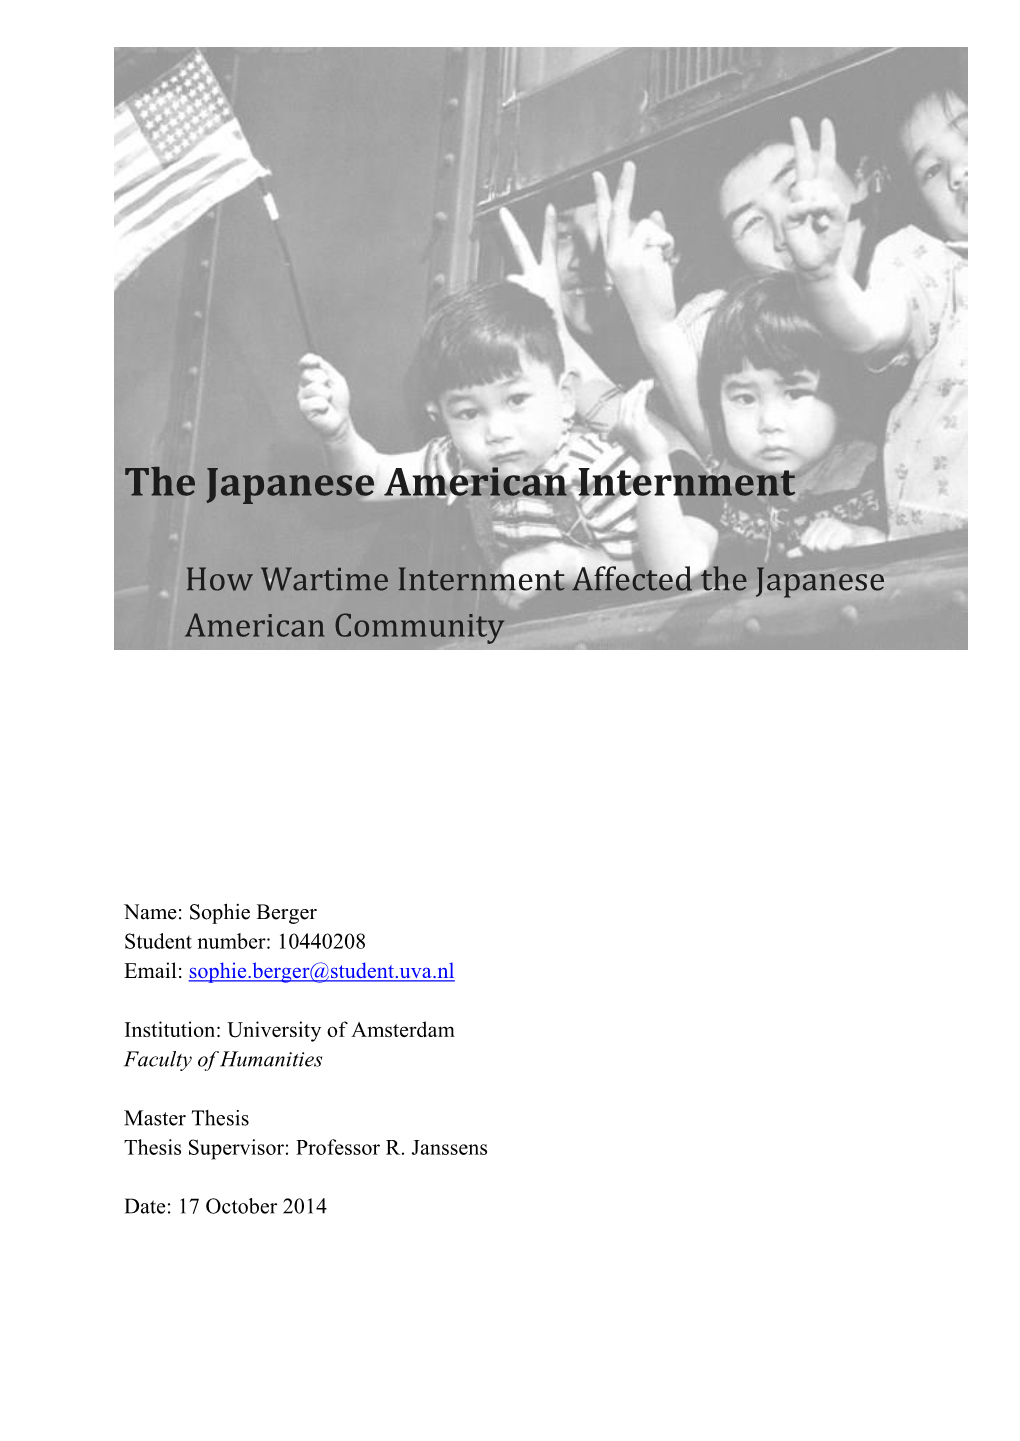 The Japanese American Internment Experience